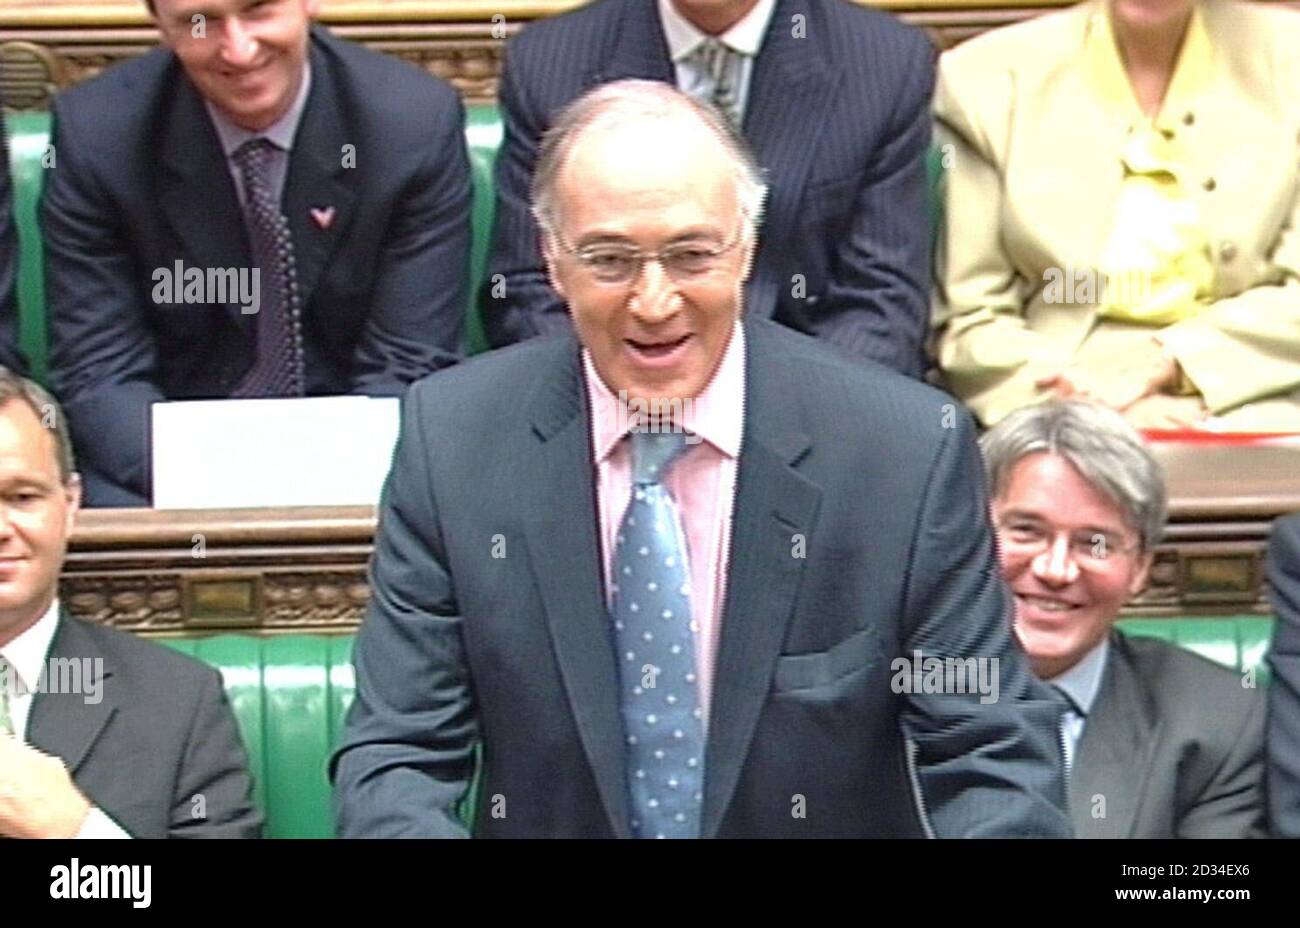 Michael Howard, Leader of the Conservative Party, during the weekly Prime Minister's Question Time in the House of Commons, London, Wednesday October 12 2005. PRESS ASSOCIATION Photo. Photo credit should read: PA Stock Photo